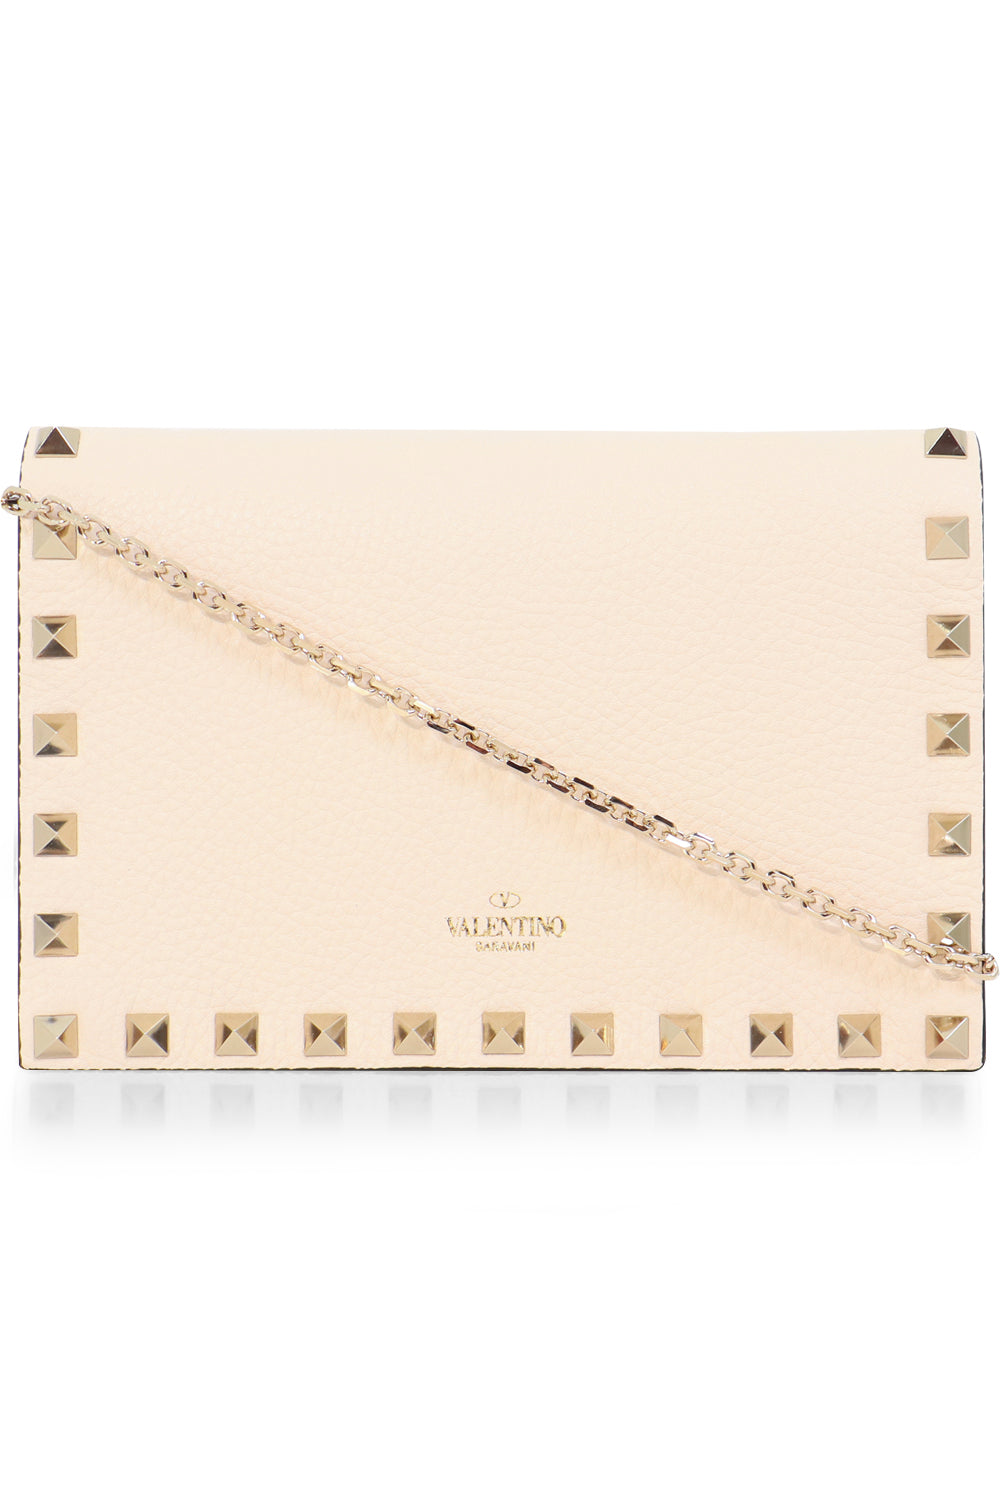 VALENTINO BAGS ROCKSTUD ENVELOPE CLUTCH ON CHAIN IVORY